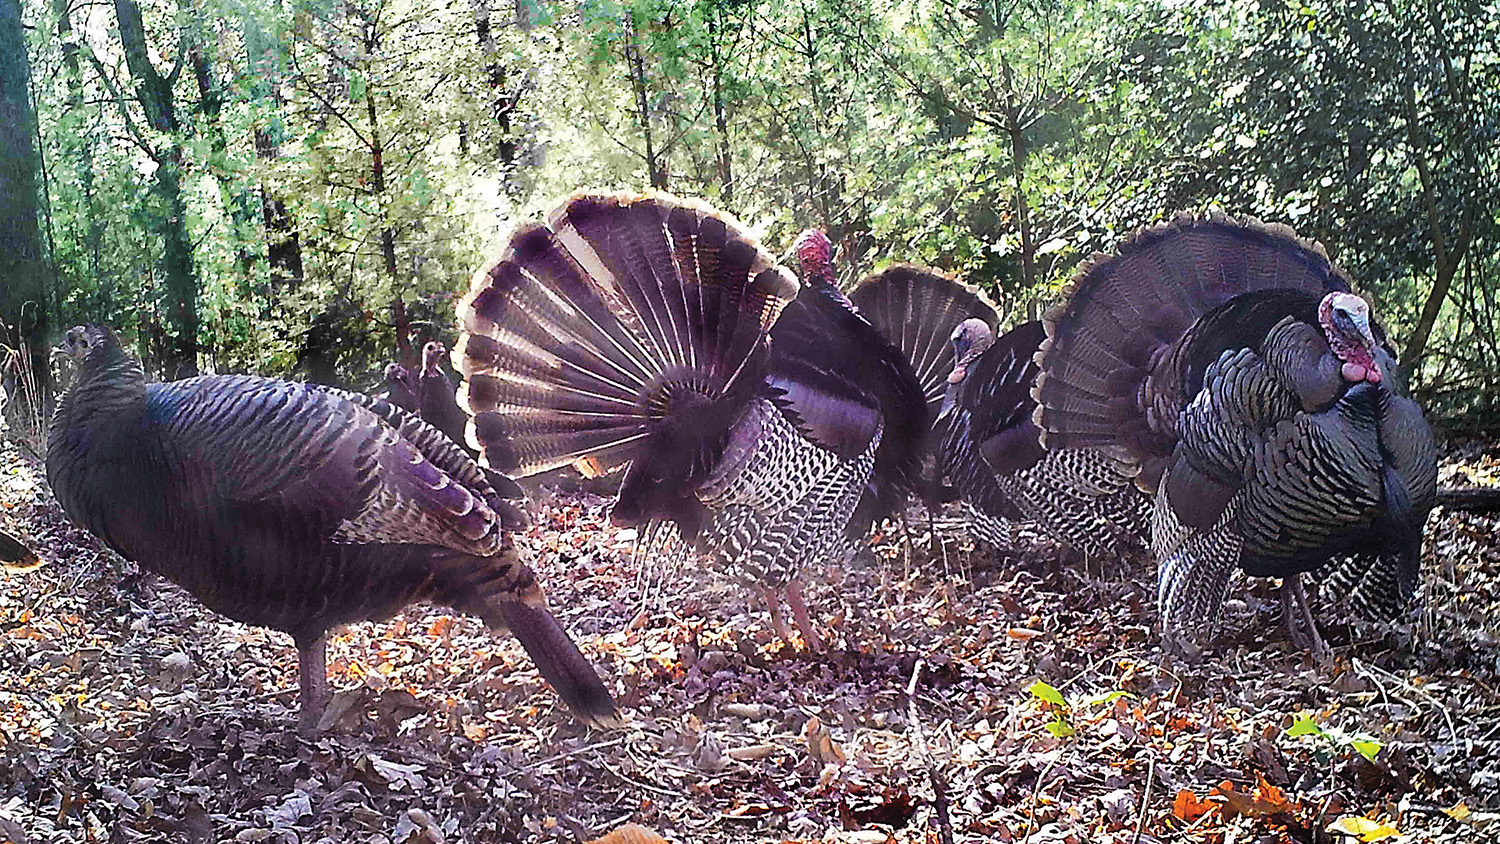 Turkeys stand together in a forest - Tracking Turkeys - College of Natural Resources NC State University